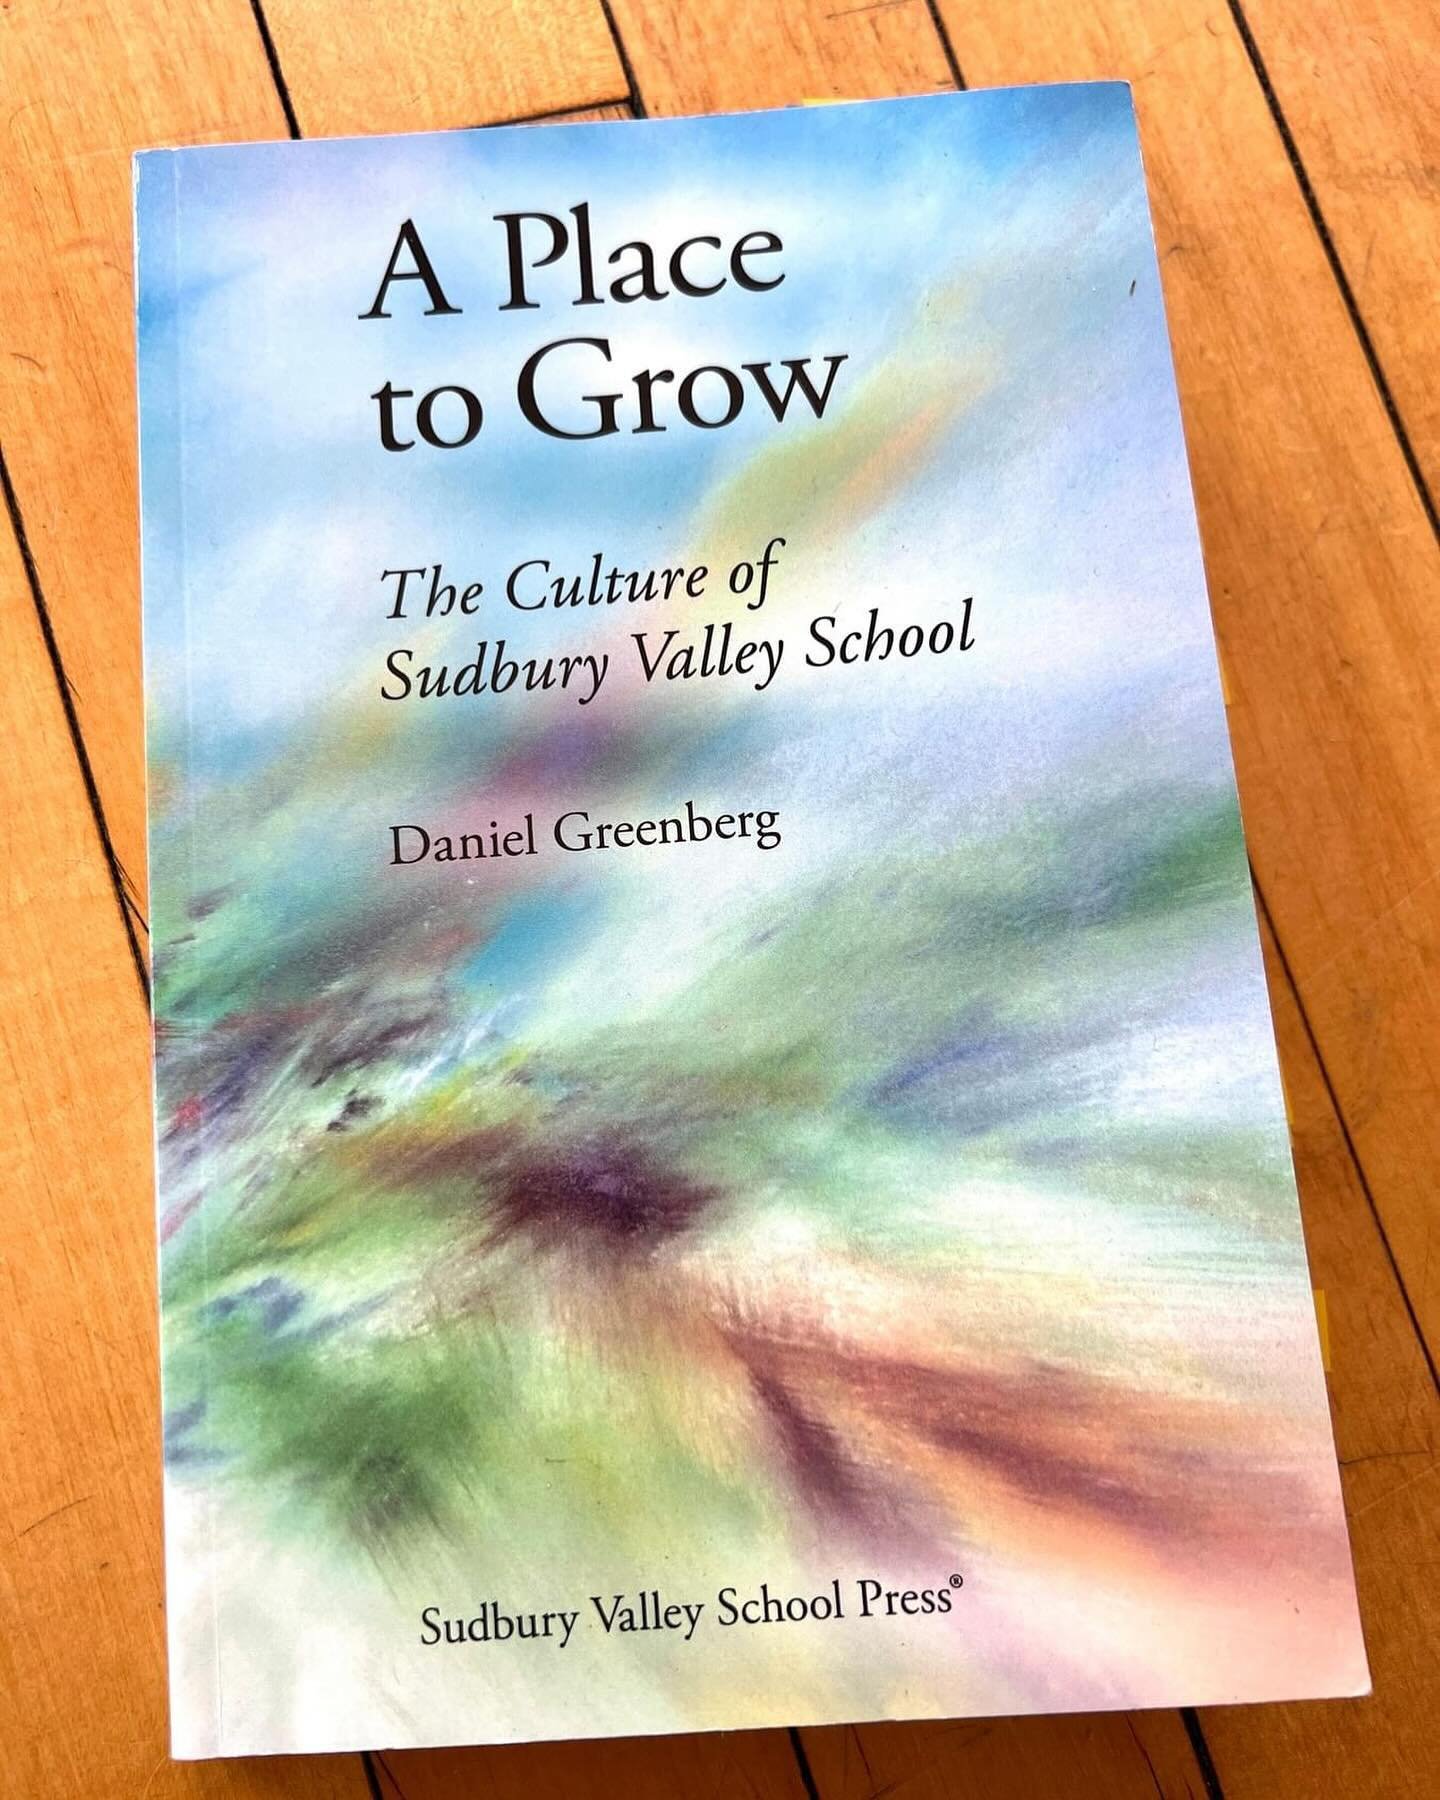 Interested in learning more about the Sudbury school model? 📖 𝘼 𝙋𝙡𝙖𝙘𝙚 𝙩𝙤 𝙂𝙧𝙤𝙬: 𝙏𝙝𝙚 𝘾𝙪𝙡𝙩𝙪𝙧𝙚 𝙤𝙛 𝙎𝙪𝙙𝙗𝙪𝙧𝙮 𝙑𝙖𝙡𝙡𝙚𝙮 𝙎𝙘𝙝𝙤𝙤𝙡 is a great read! The book explores the many principles and practices that have evolved and